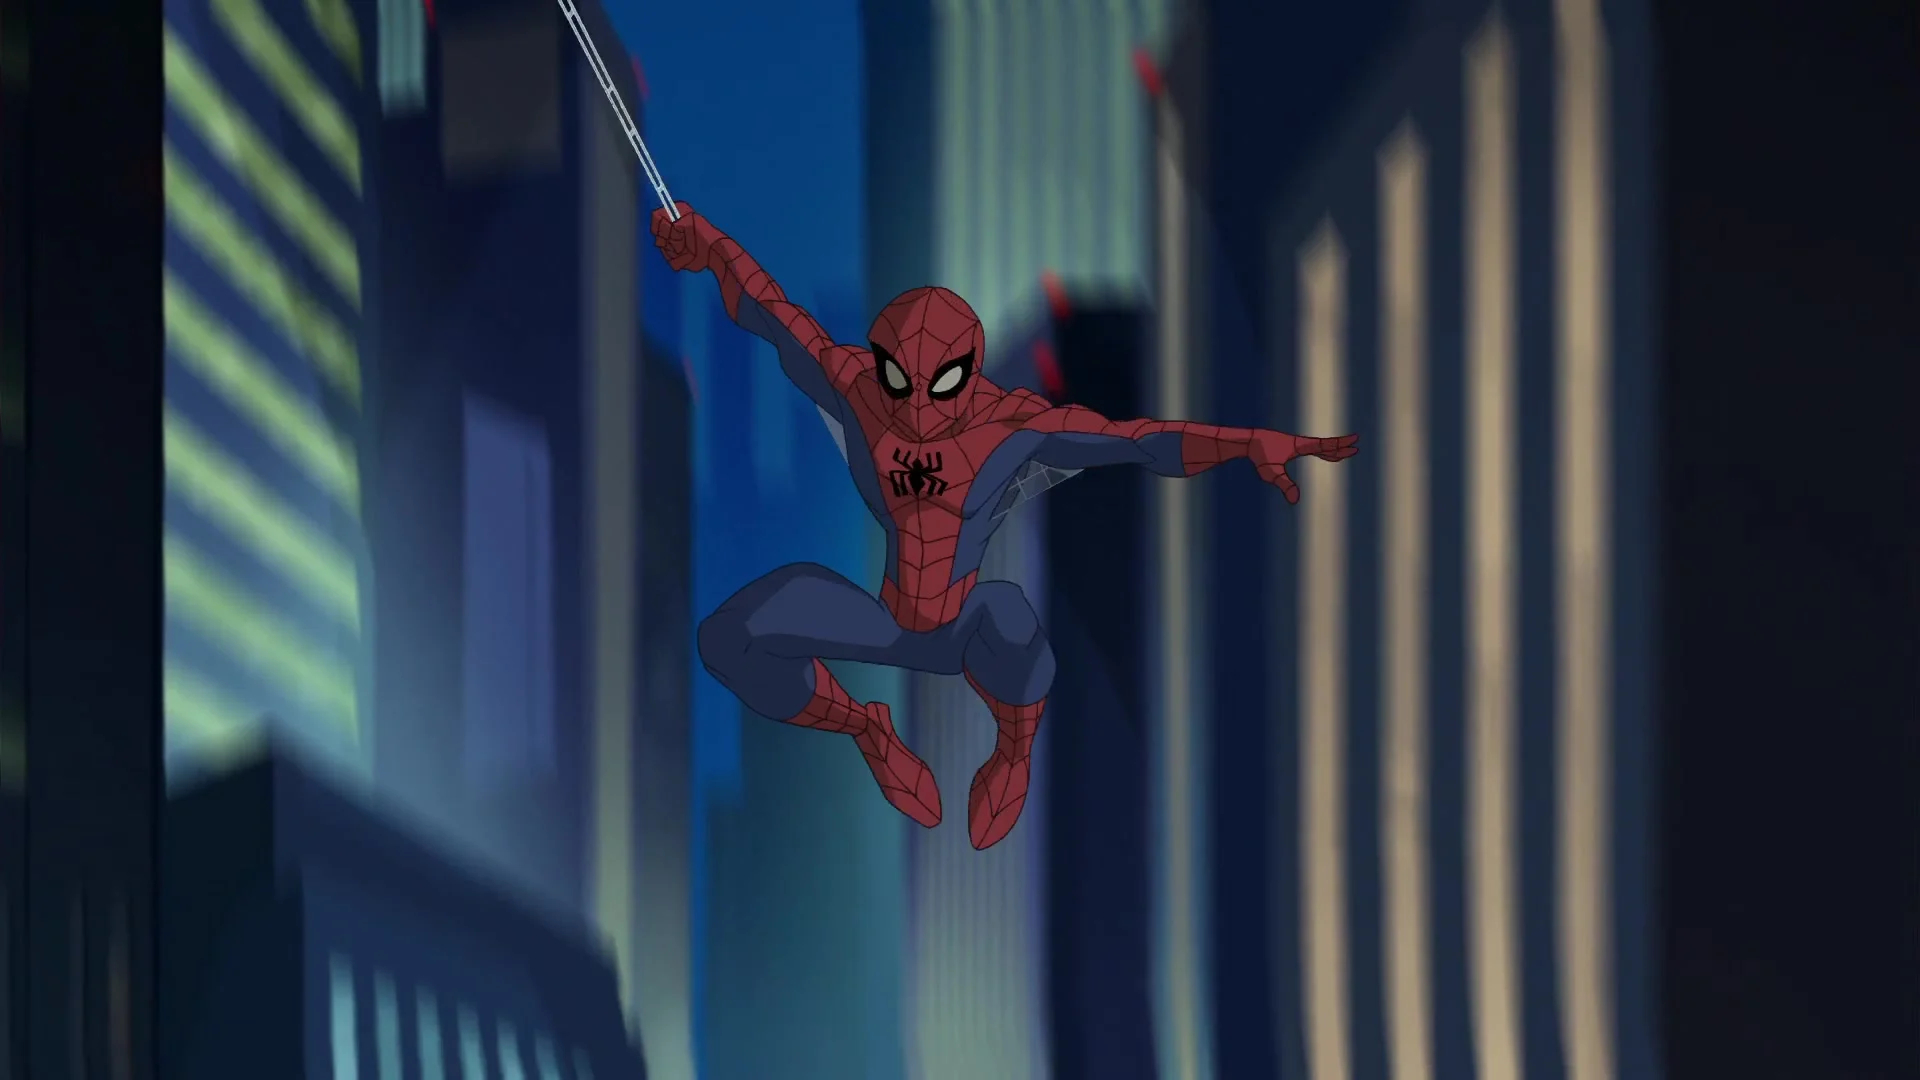 1920x1080 Image Gallery of The Spectacular Spider-Man Season 1: Episode 1 | Fancaps